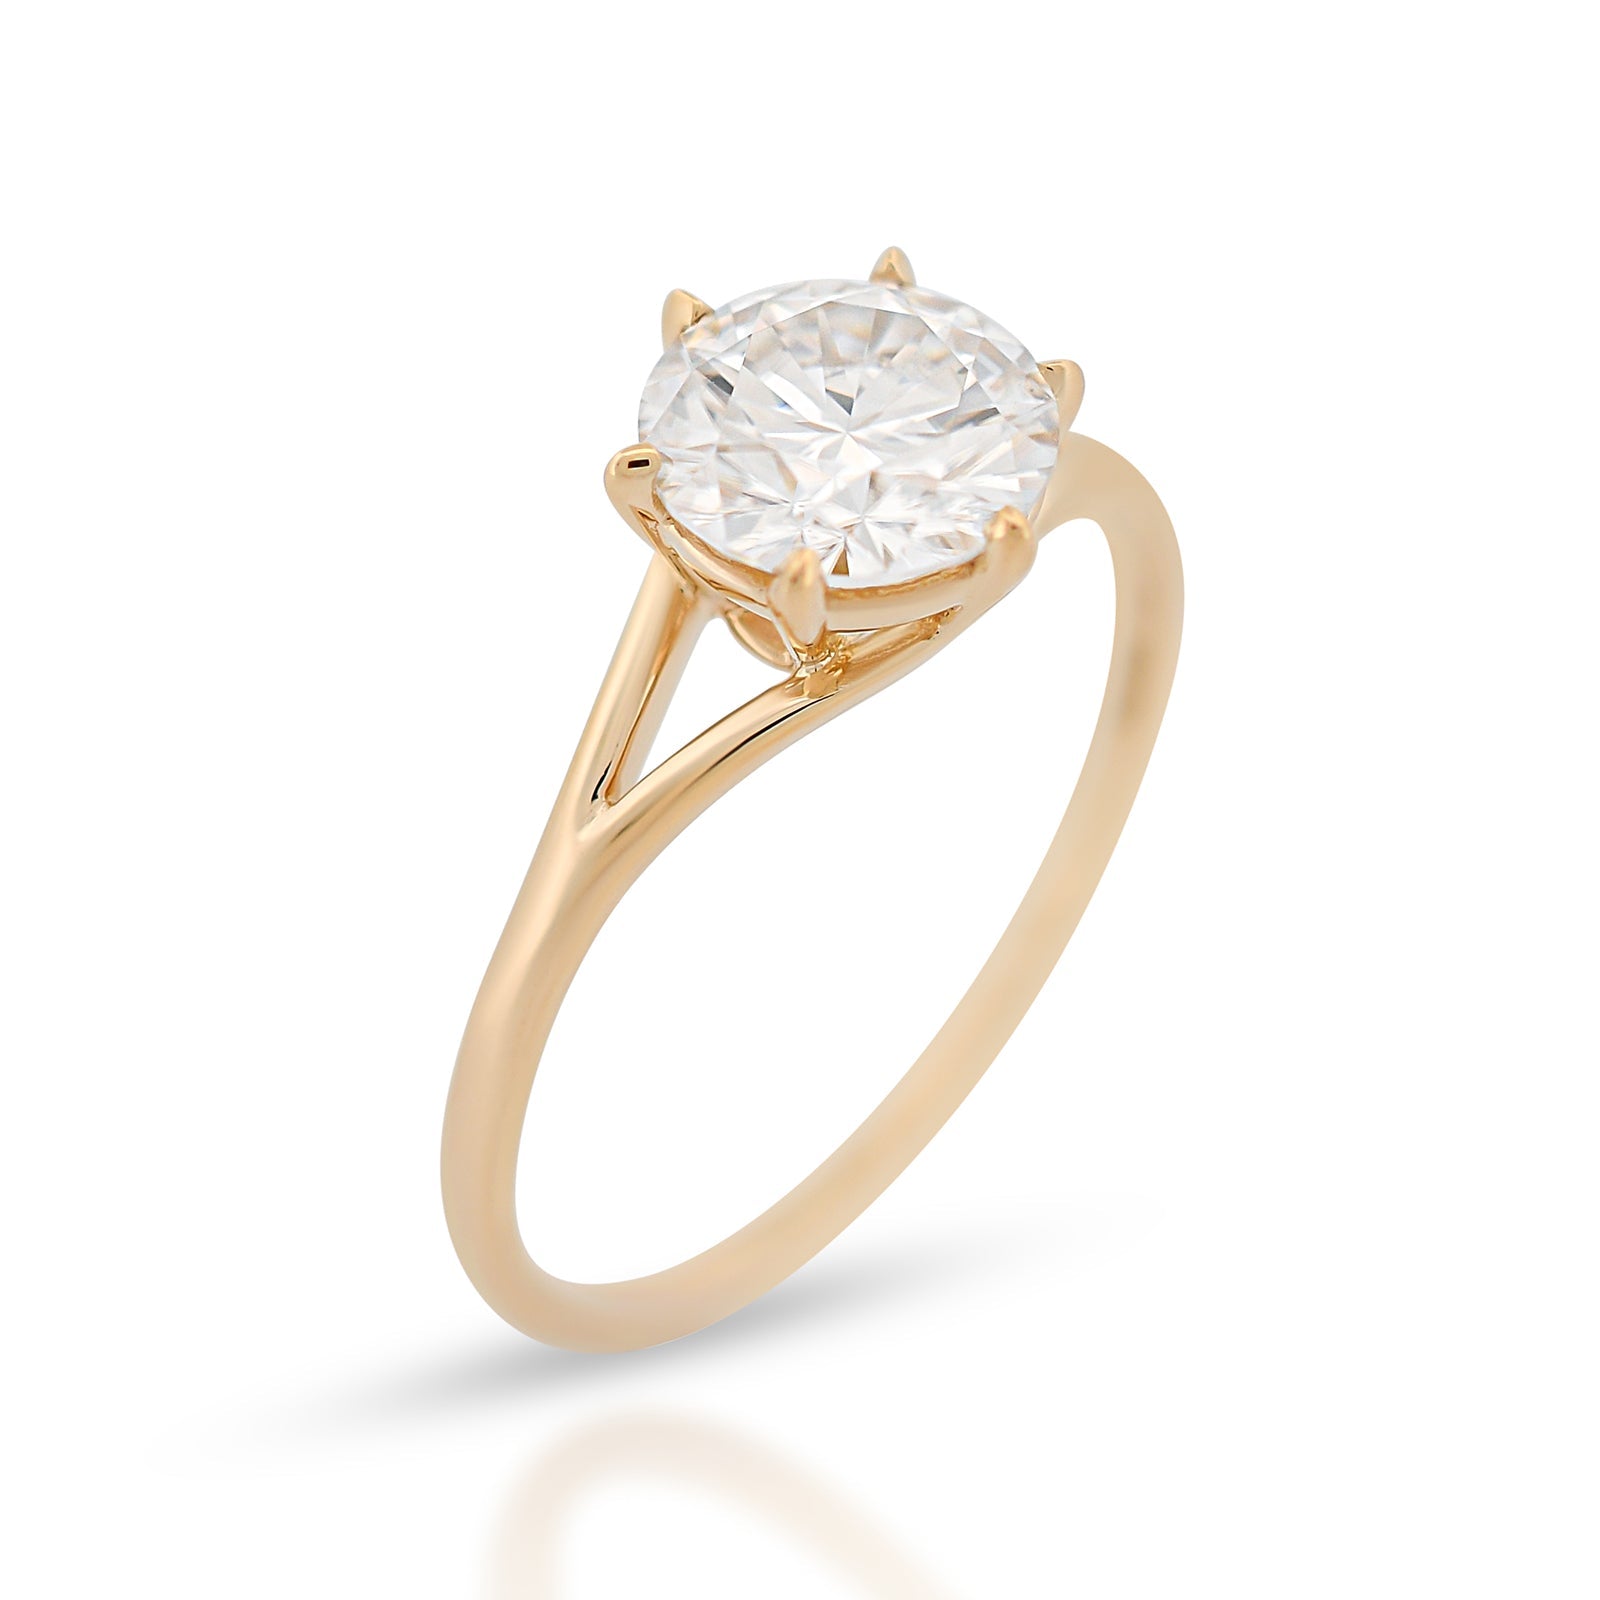 White Moissanite 2.5ct Ring in 9ct Yellow Gold